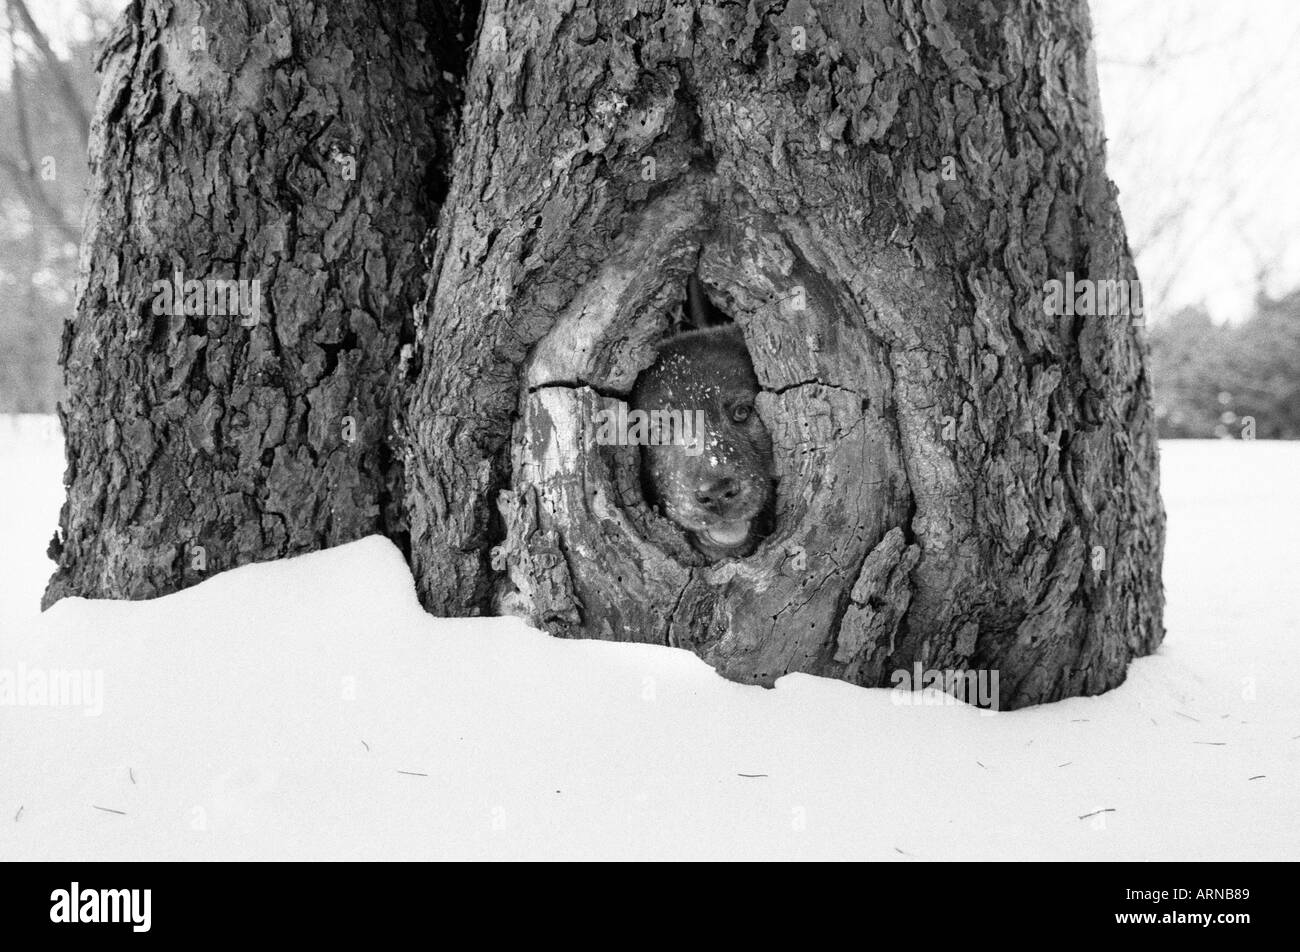 A small puppy looks through a hole in a tree Stock Photo